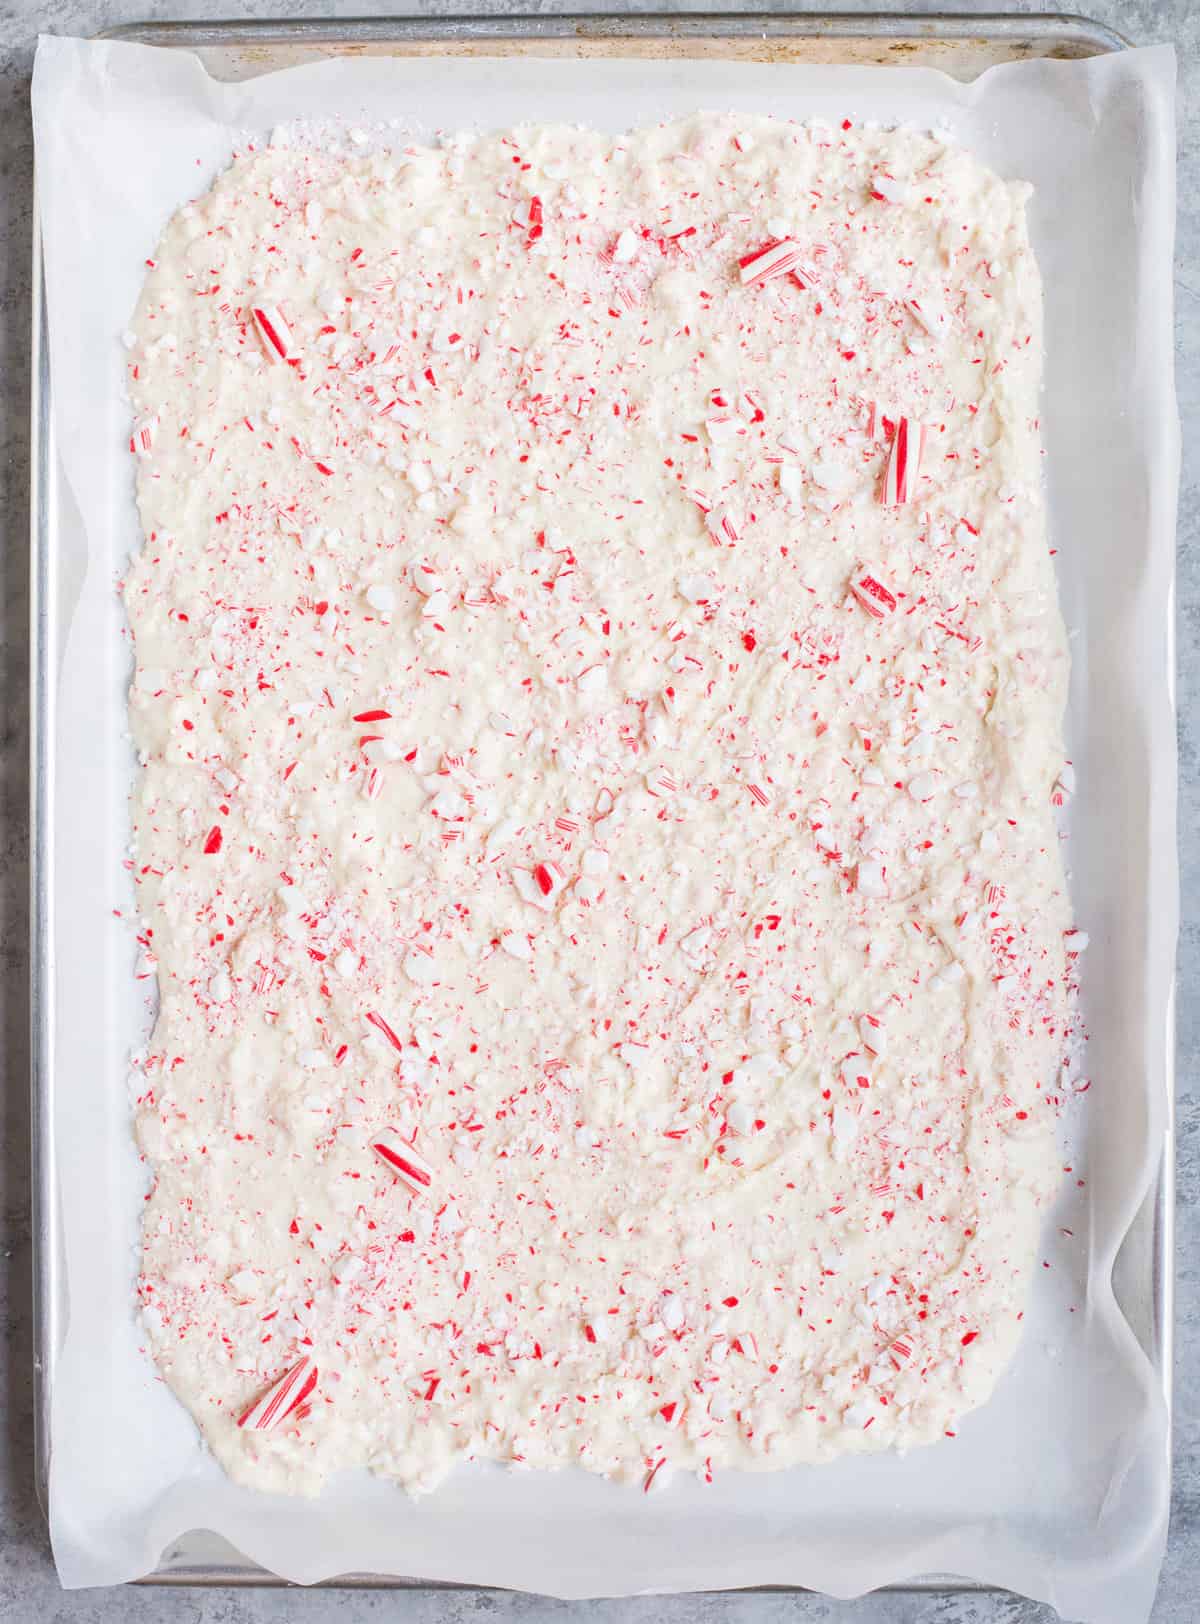 white chocolate peppermint bark spread into even layer on parchment paper